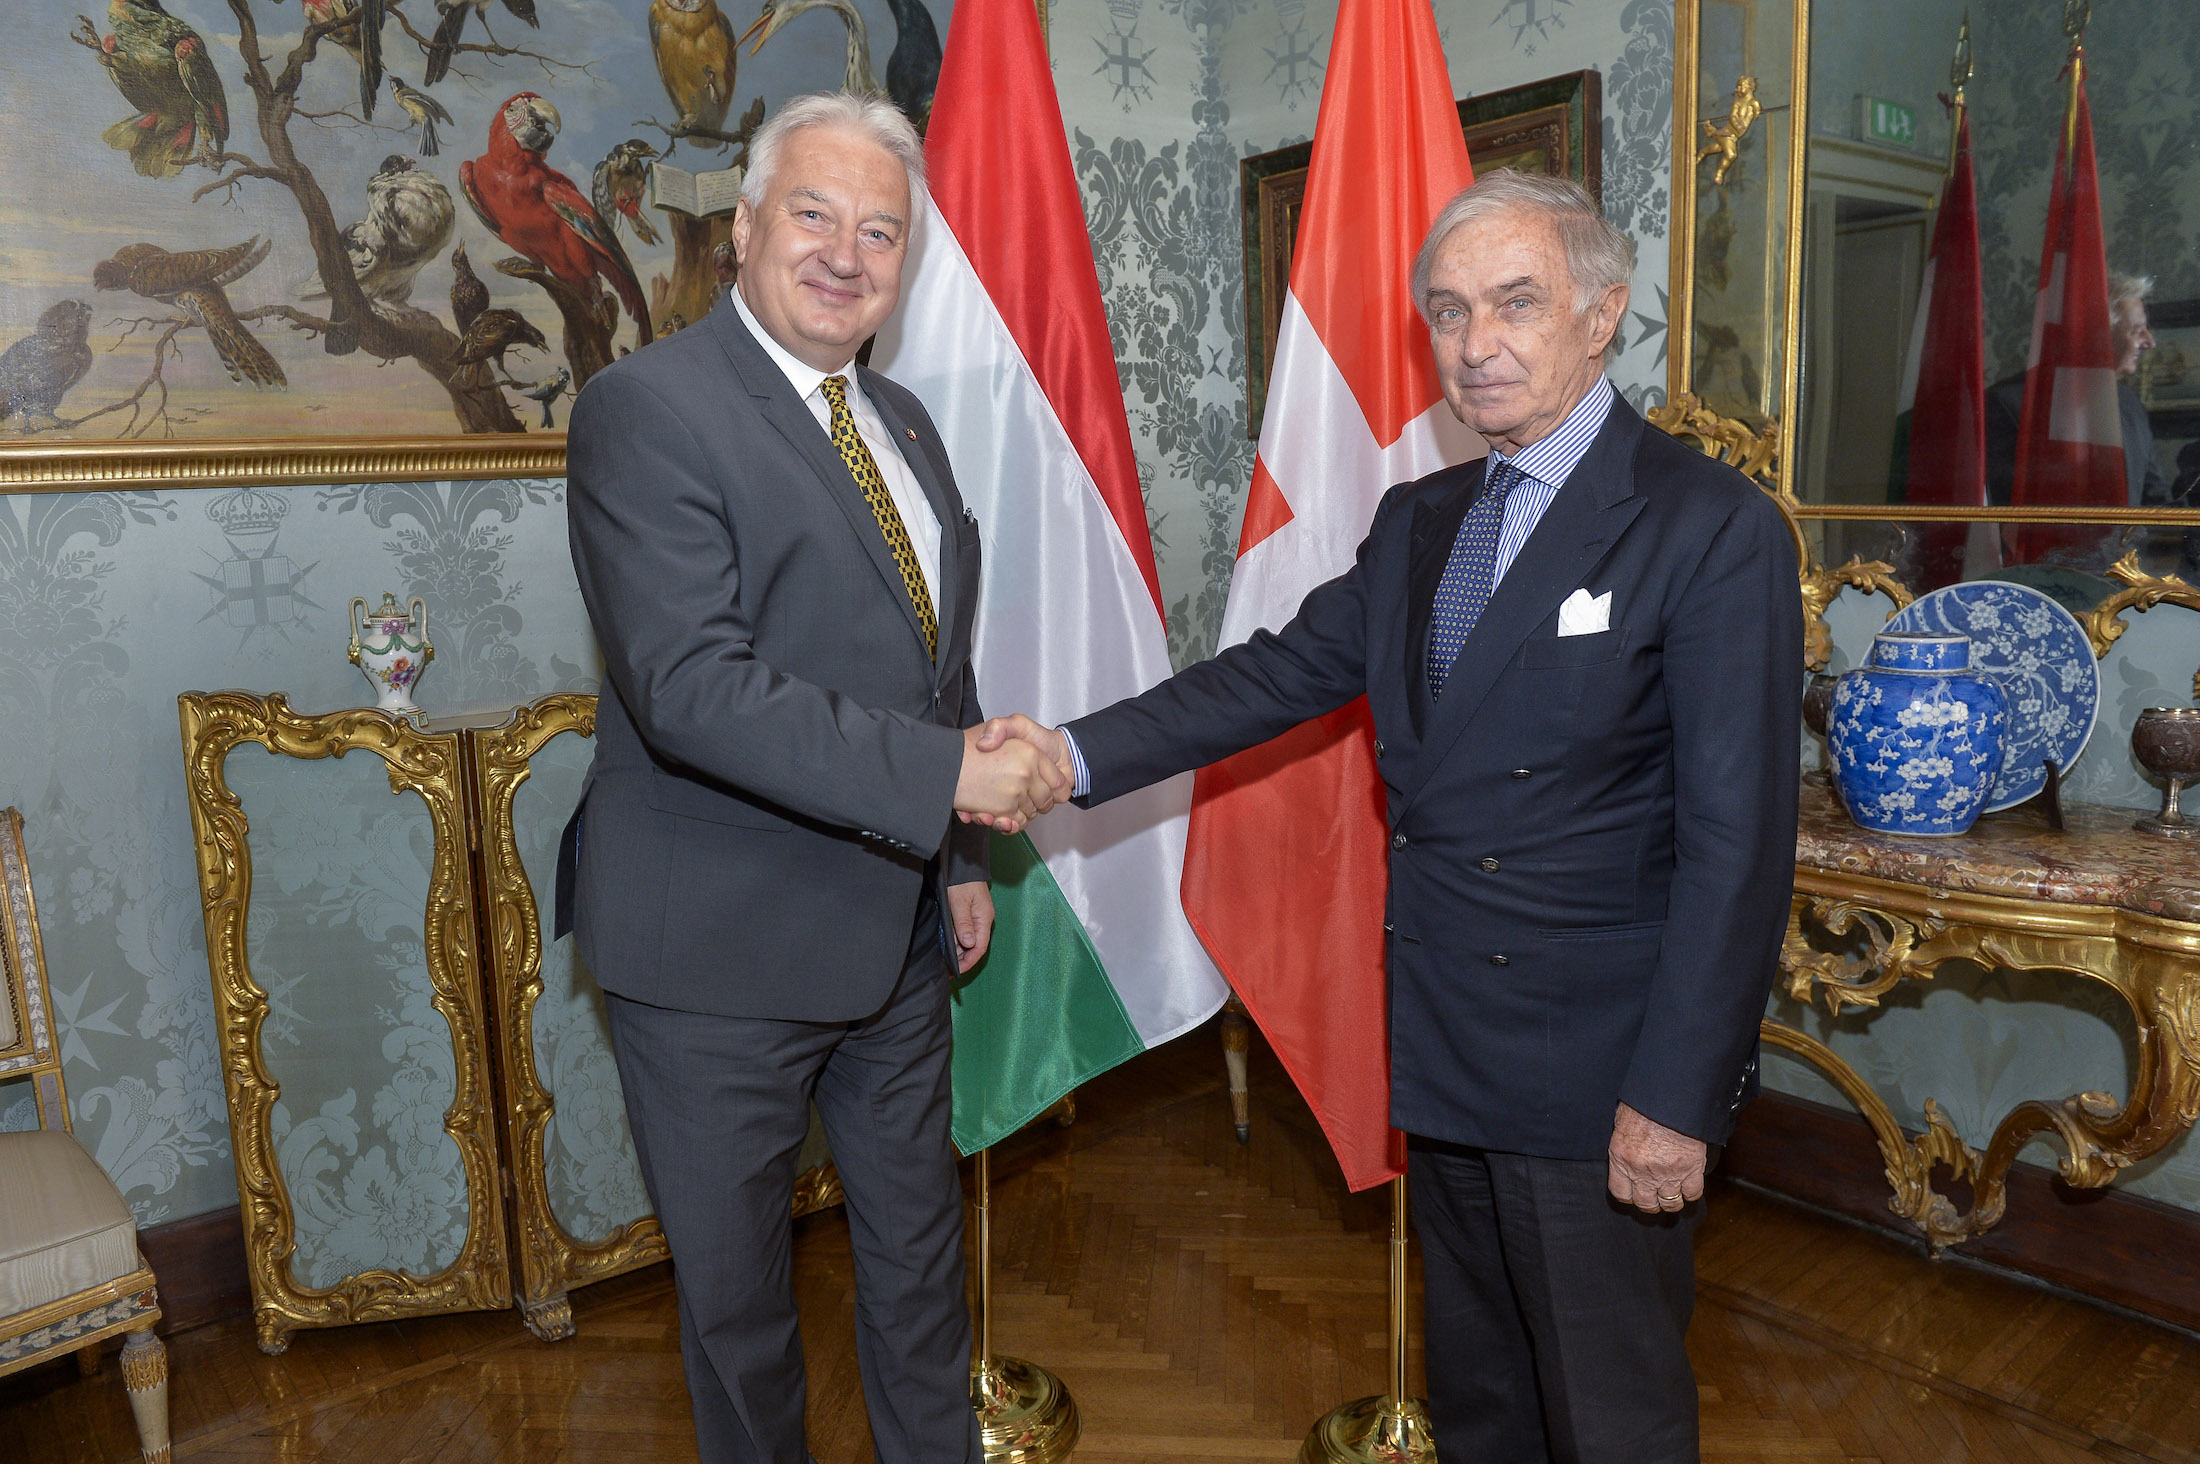 The Grand Chancellor received the deputy Prime Minister of Hungary at the Magistral Palace